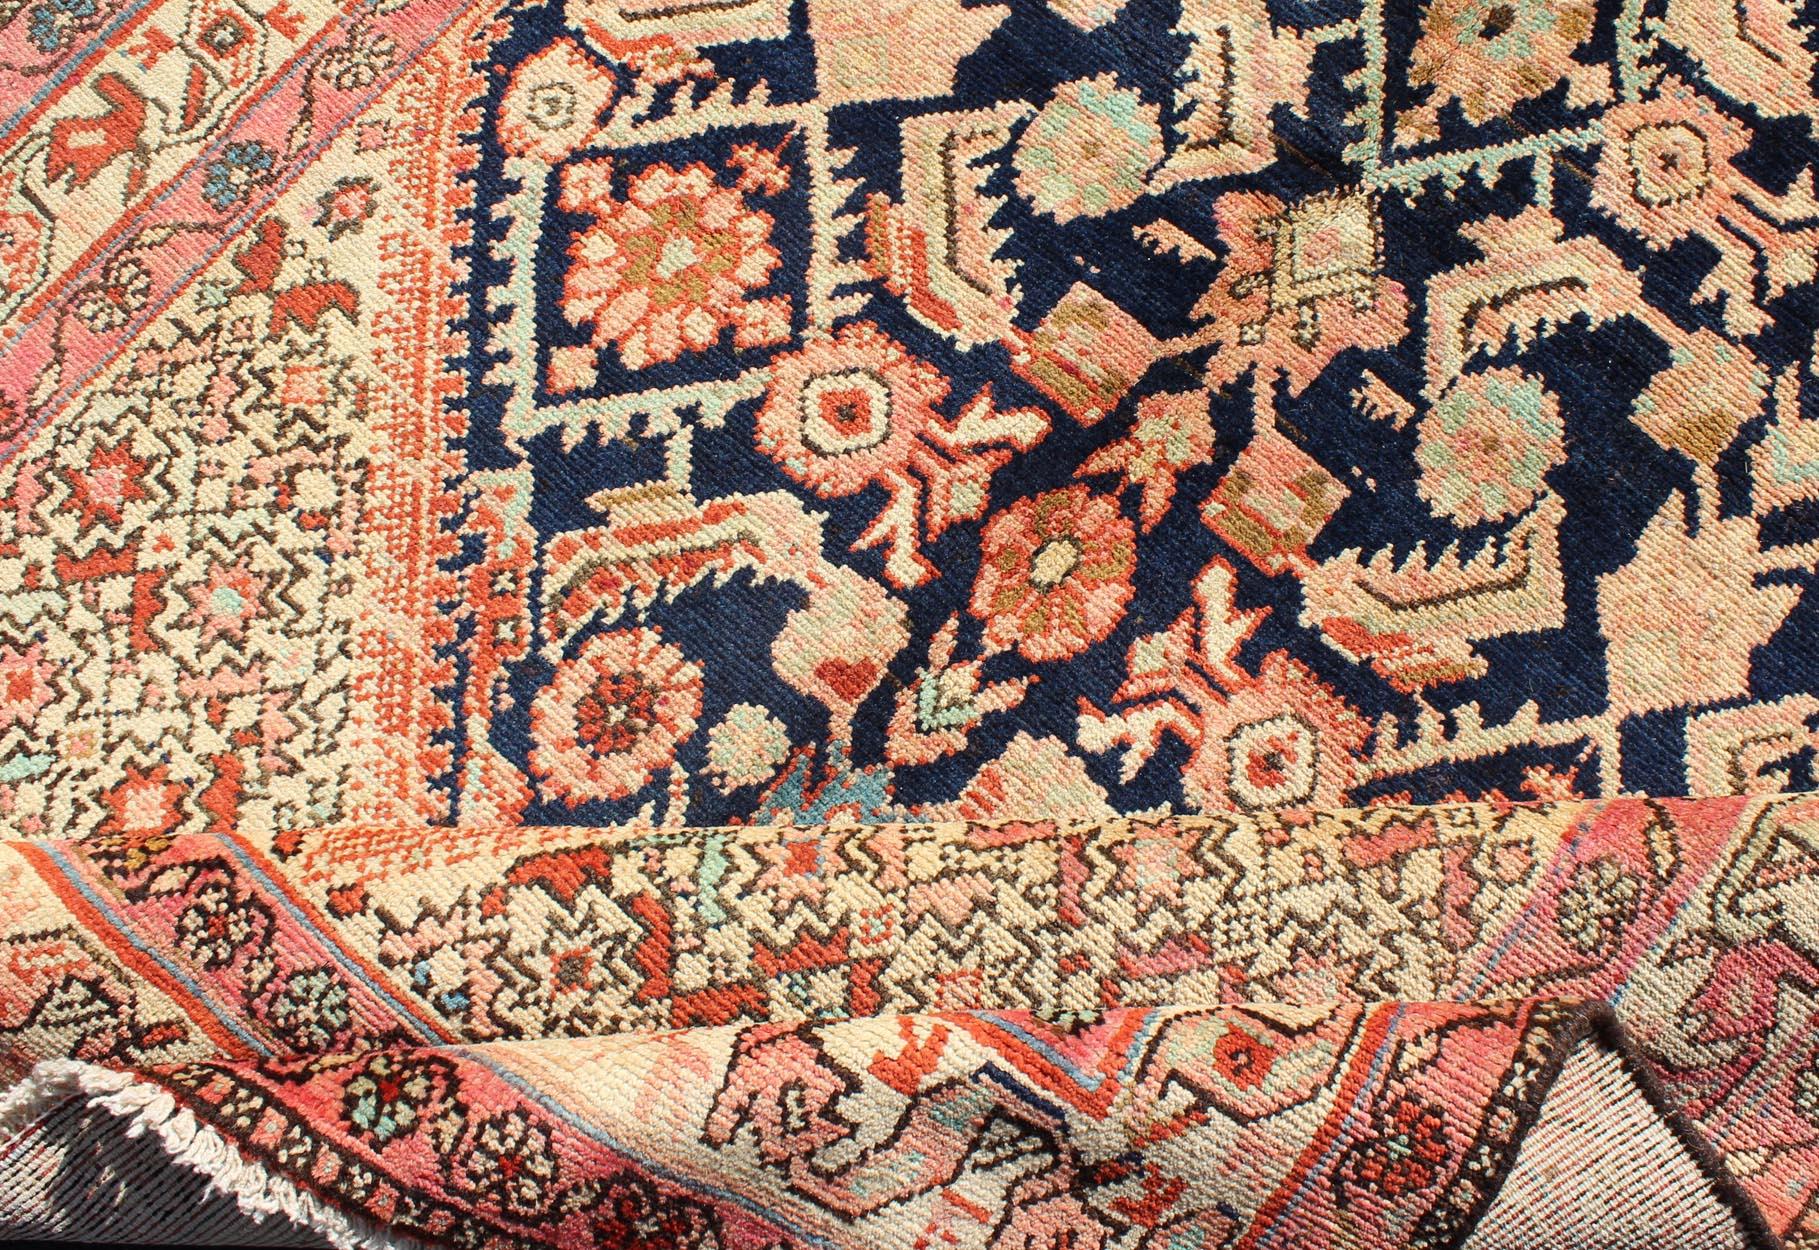 Early 20th Century Diamond Sub-Geometric Medallion Antique Malayer Persian Rug with Floral Borders